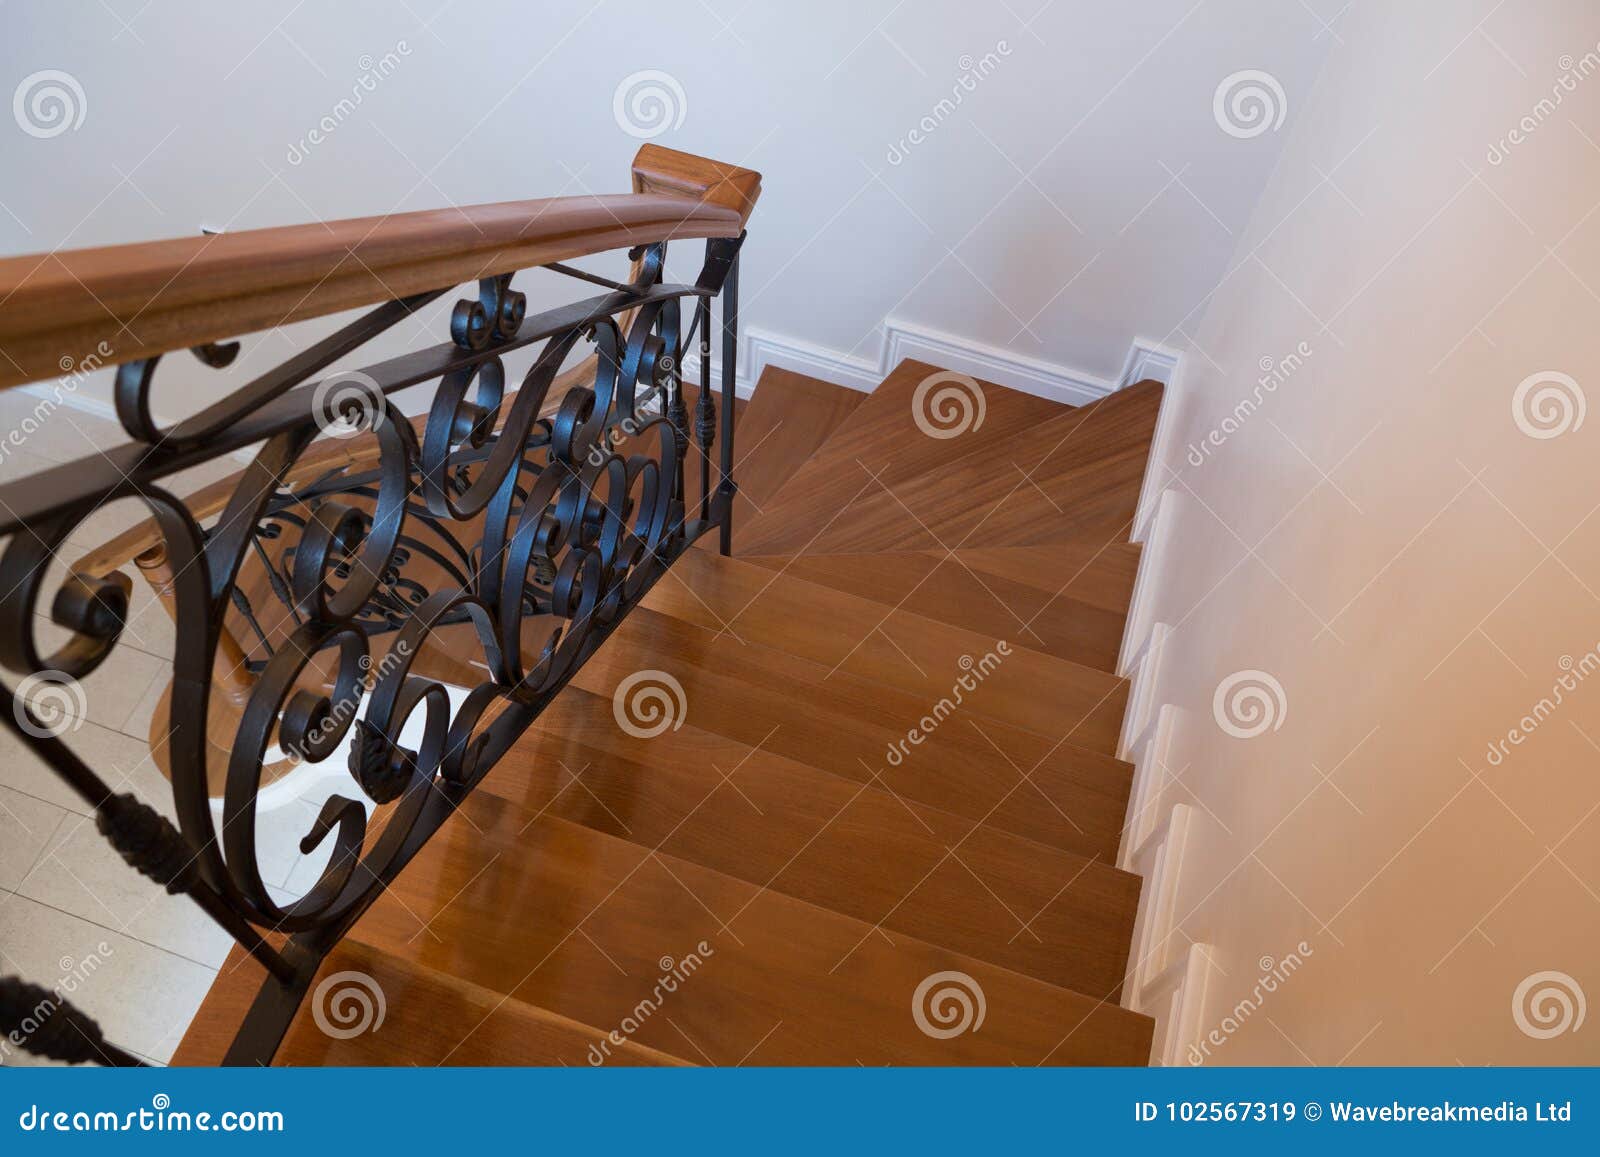 Interior Wooden Stairs With Metal Railing Stock Image